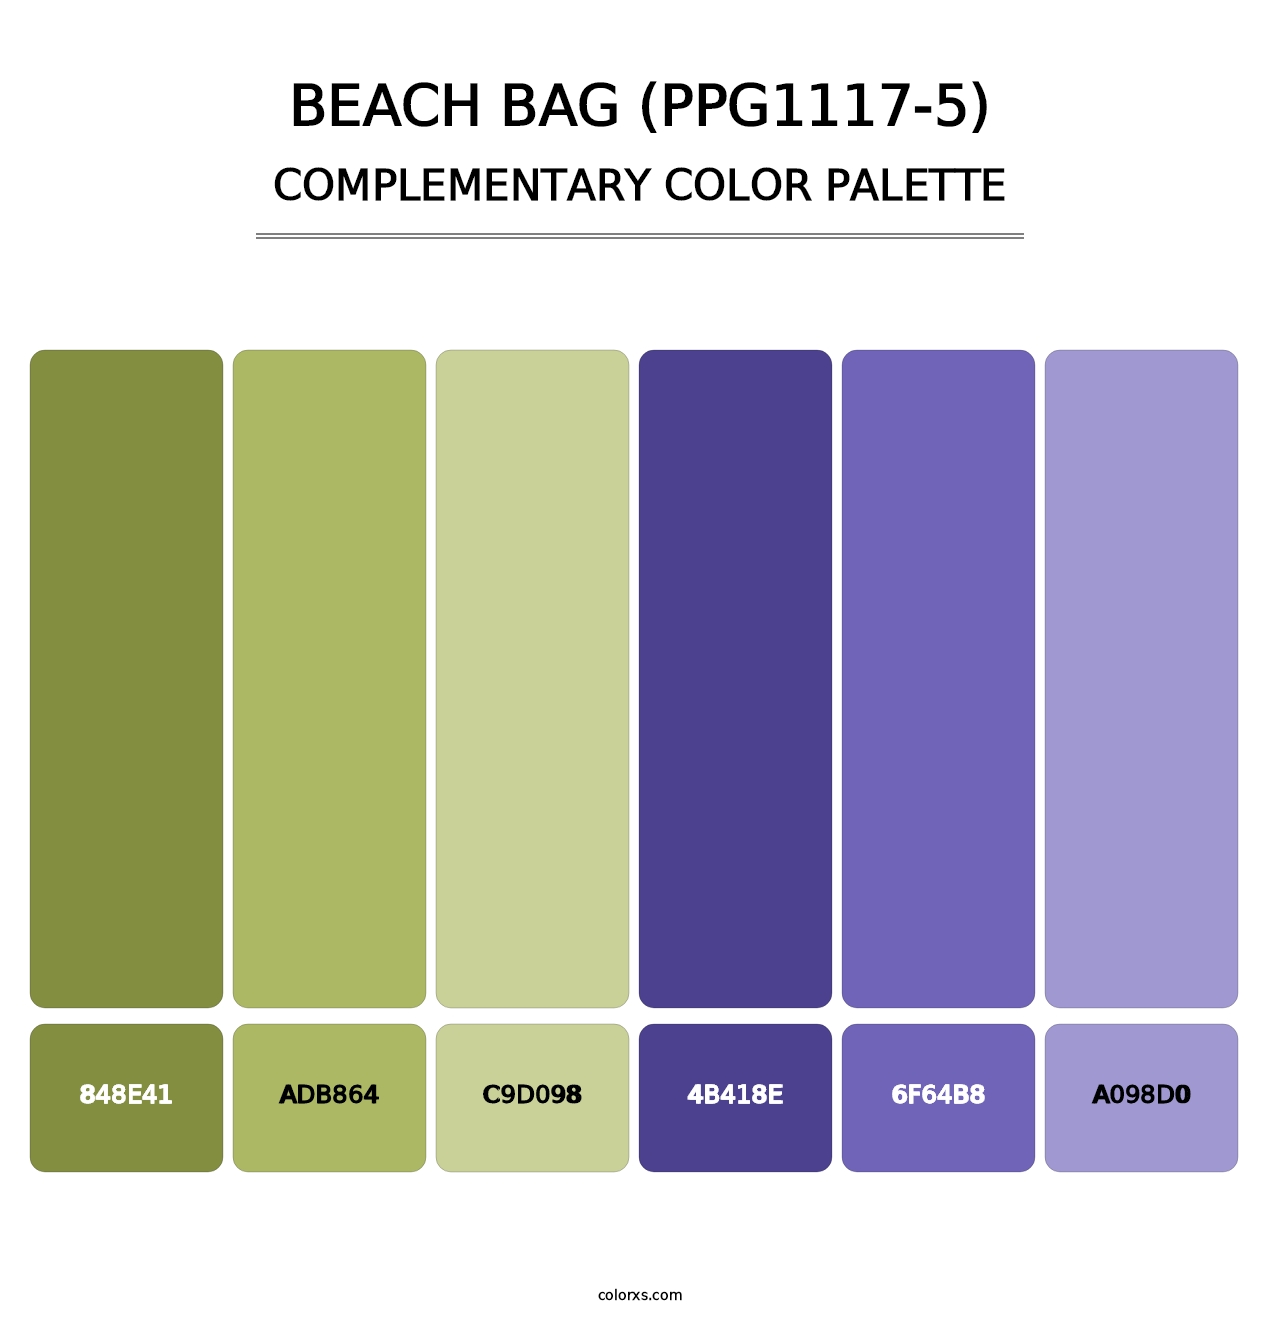 Beach Bag (PPG1117-5) - Complementary Color Palette